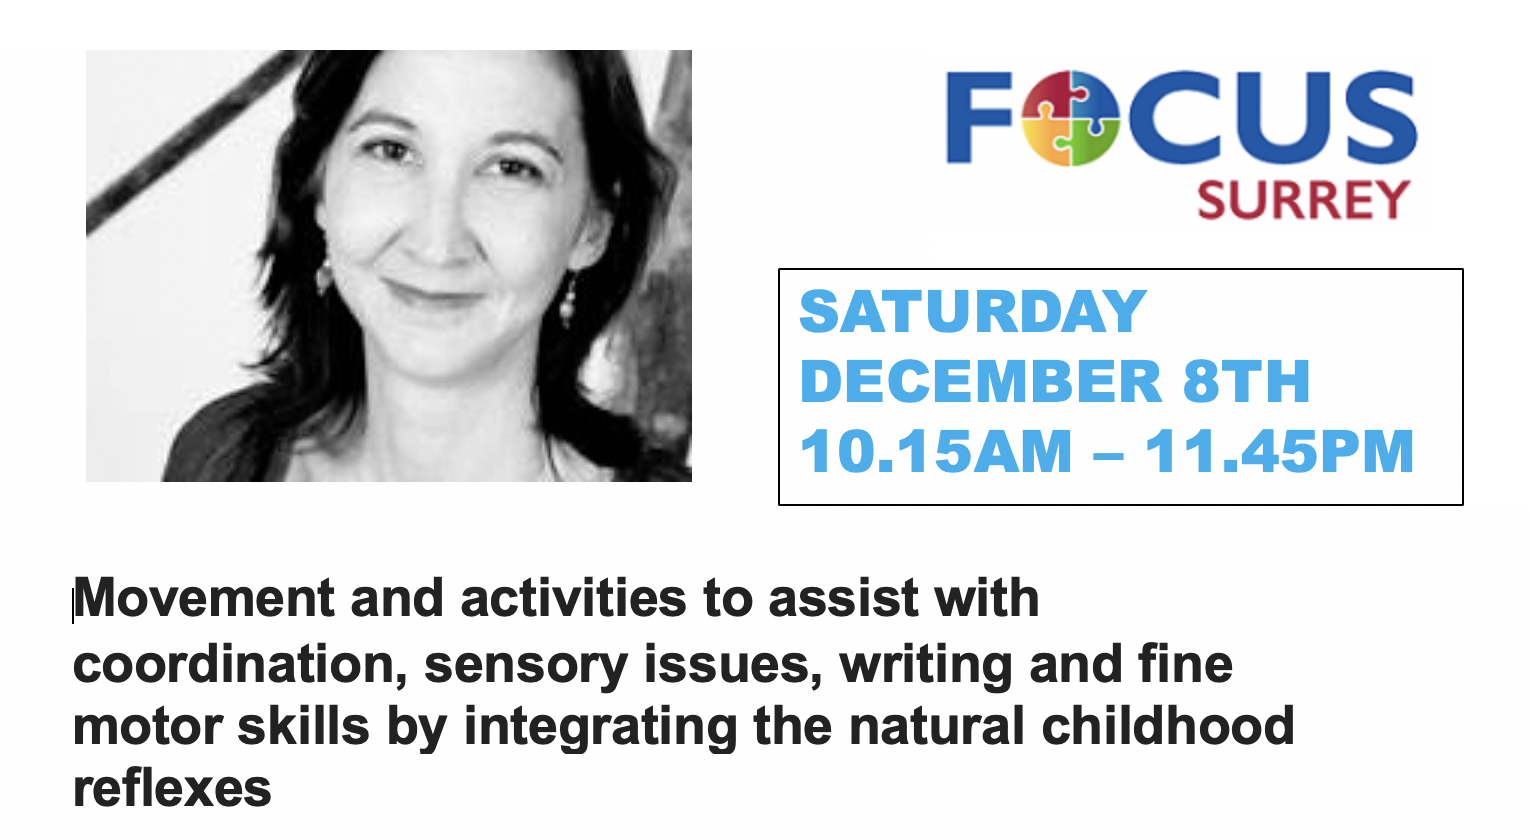 Come and meet Shelley at Focus Surrey